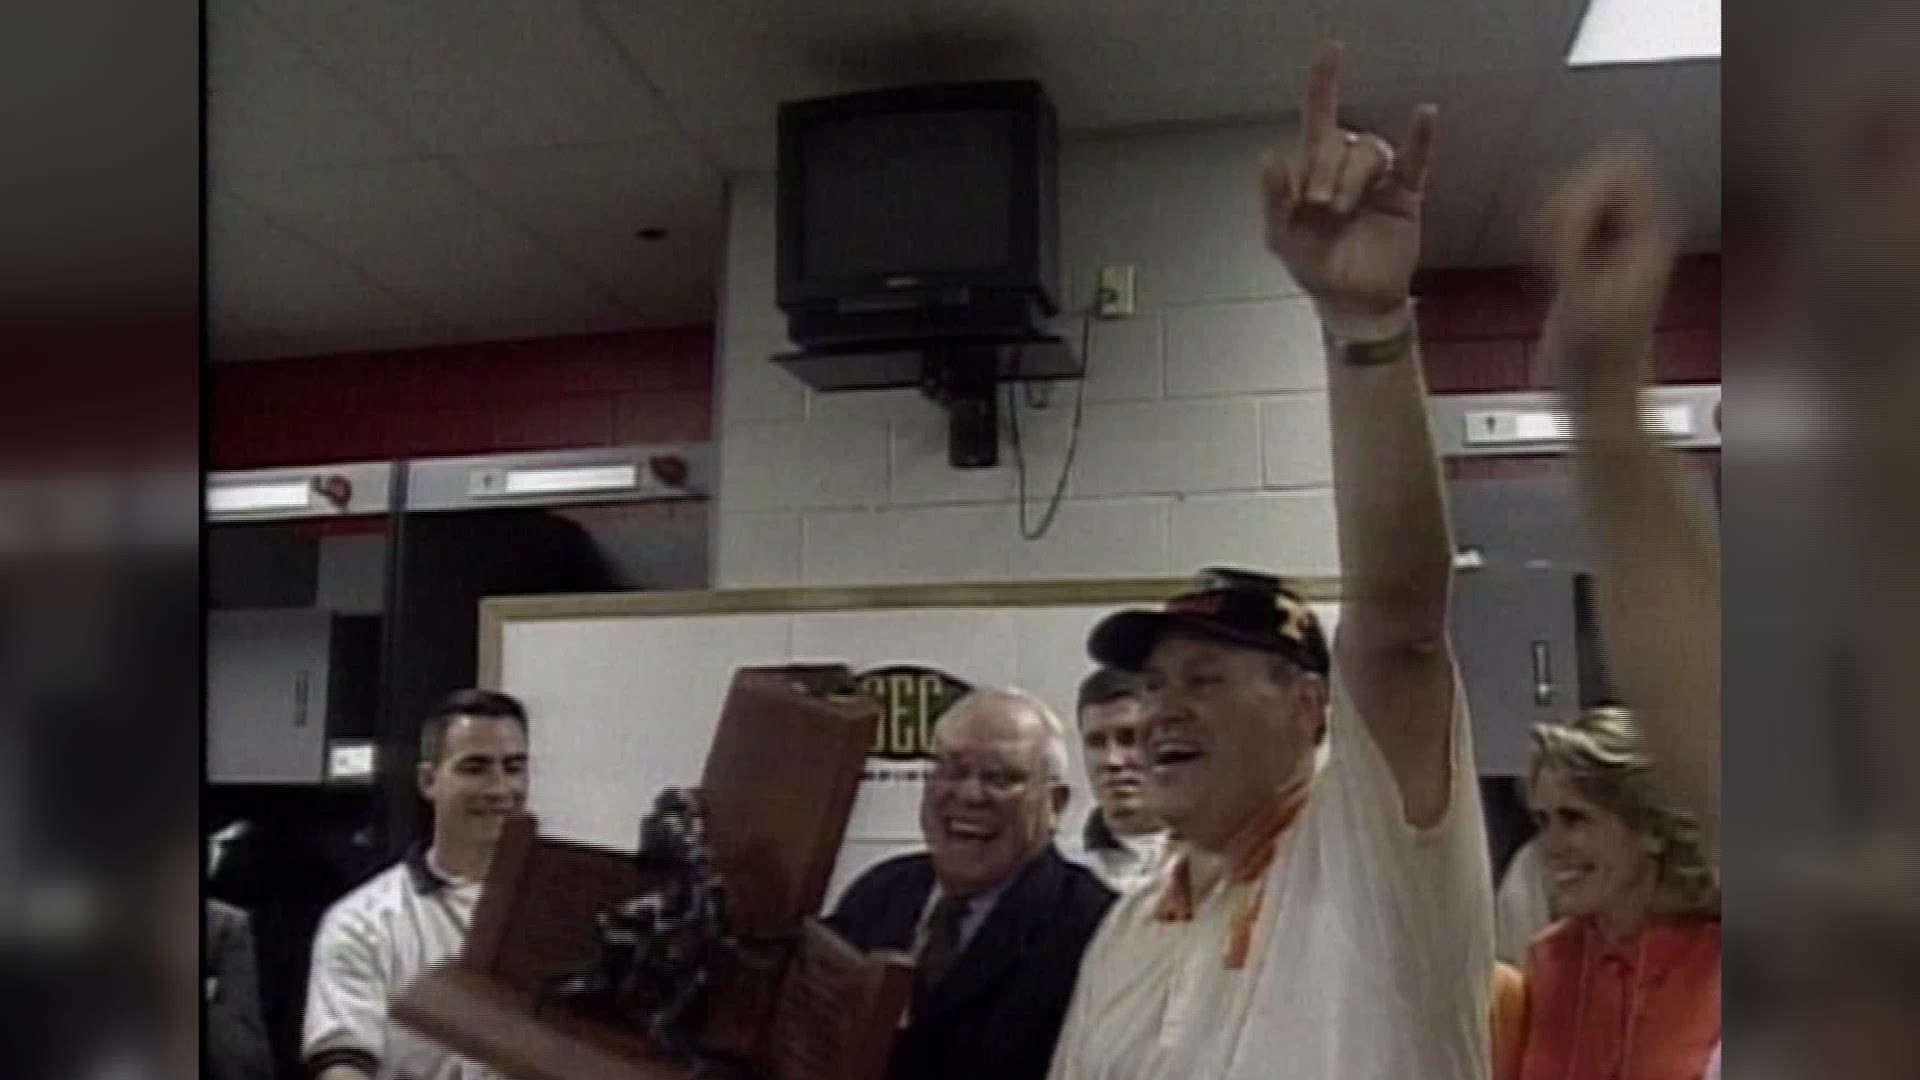 To Tennessee football fans, he was our coach. To his family, Phillip Fulmer was dad. His wife and daughters were by his side throughout the '98 championship season and beyond. This is their story.